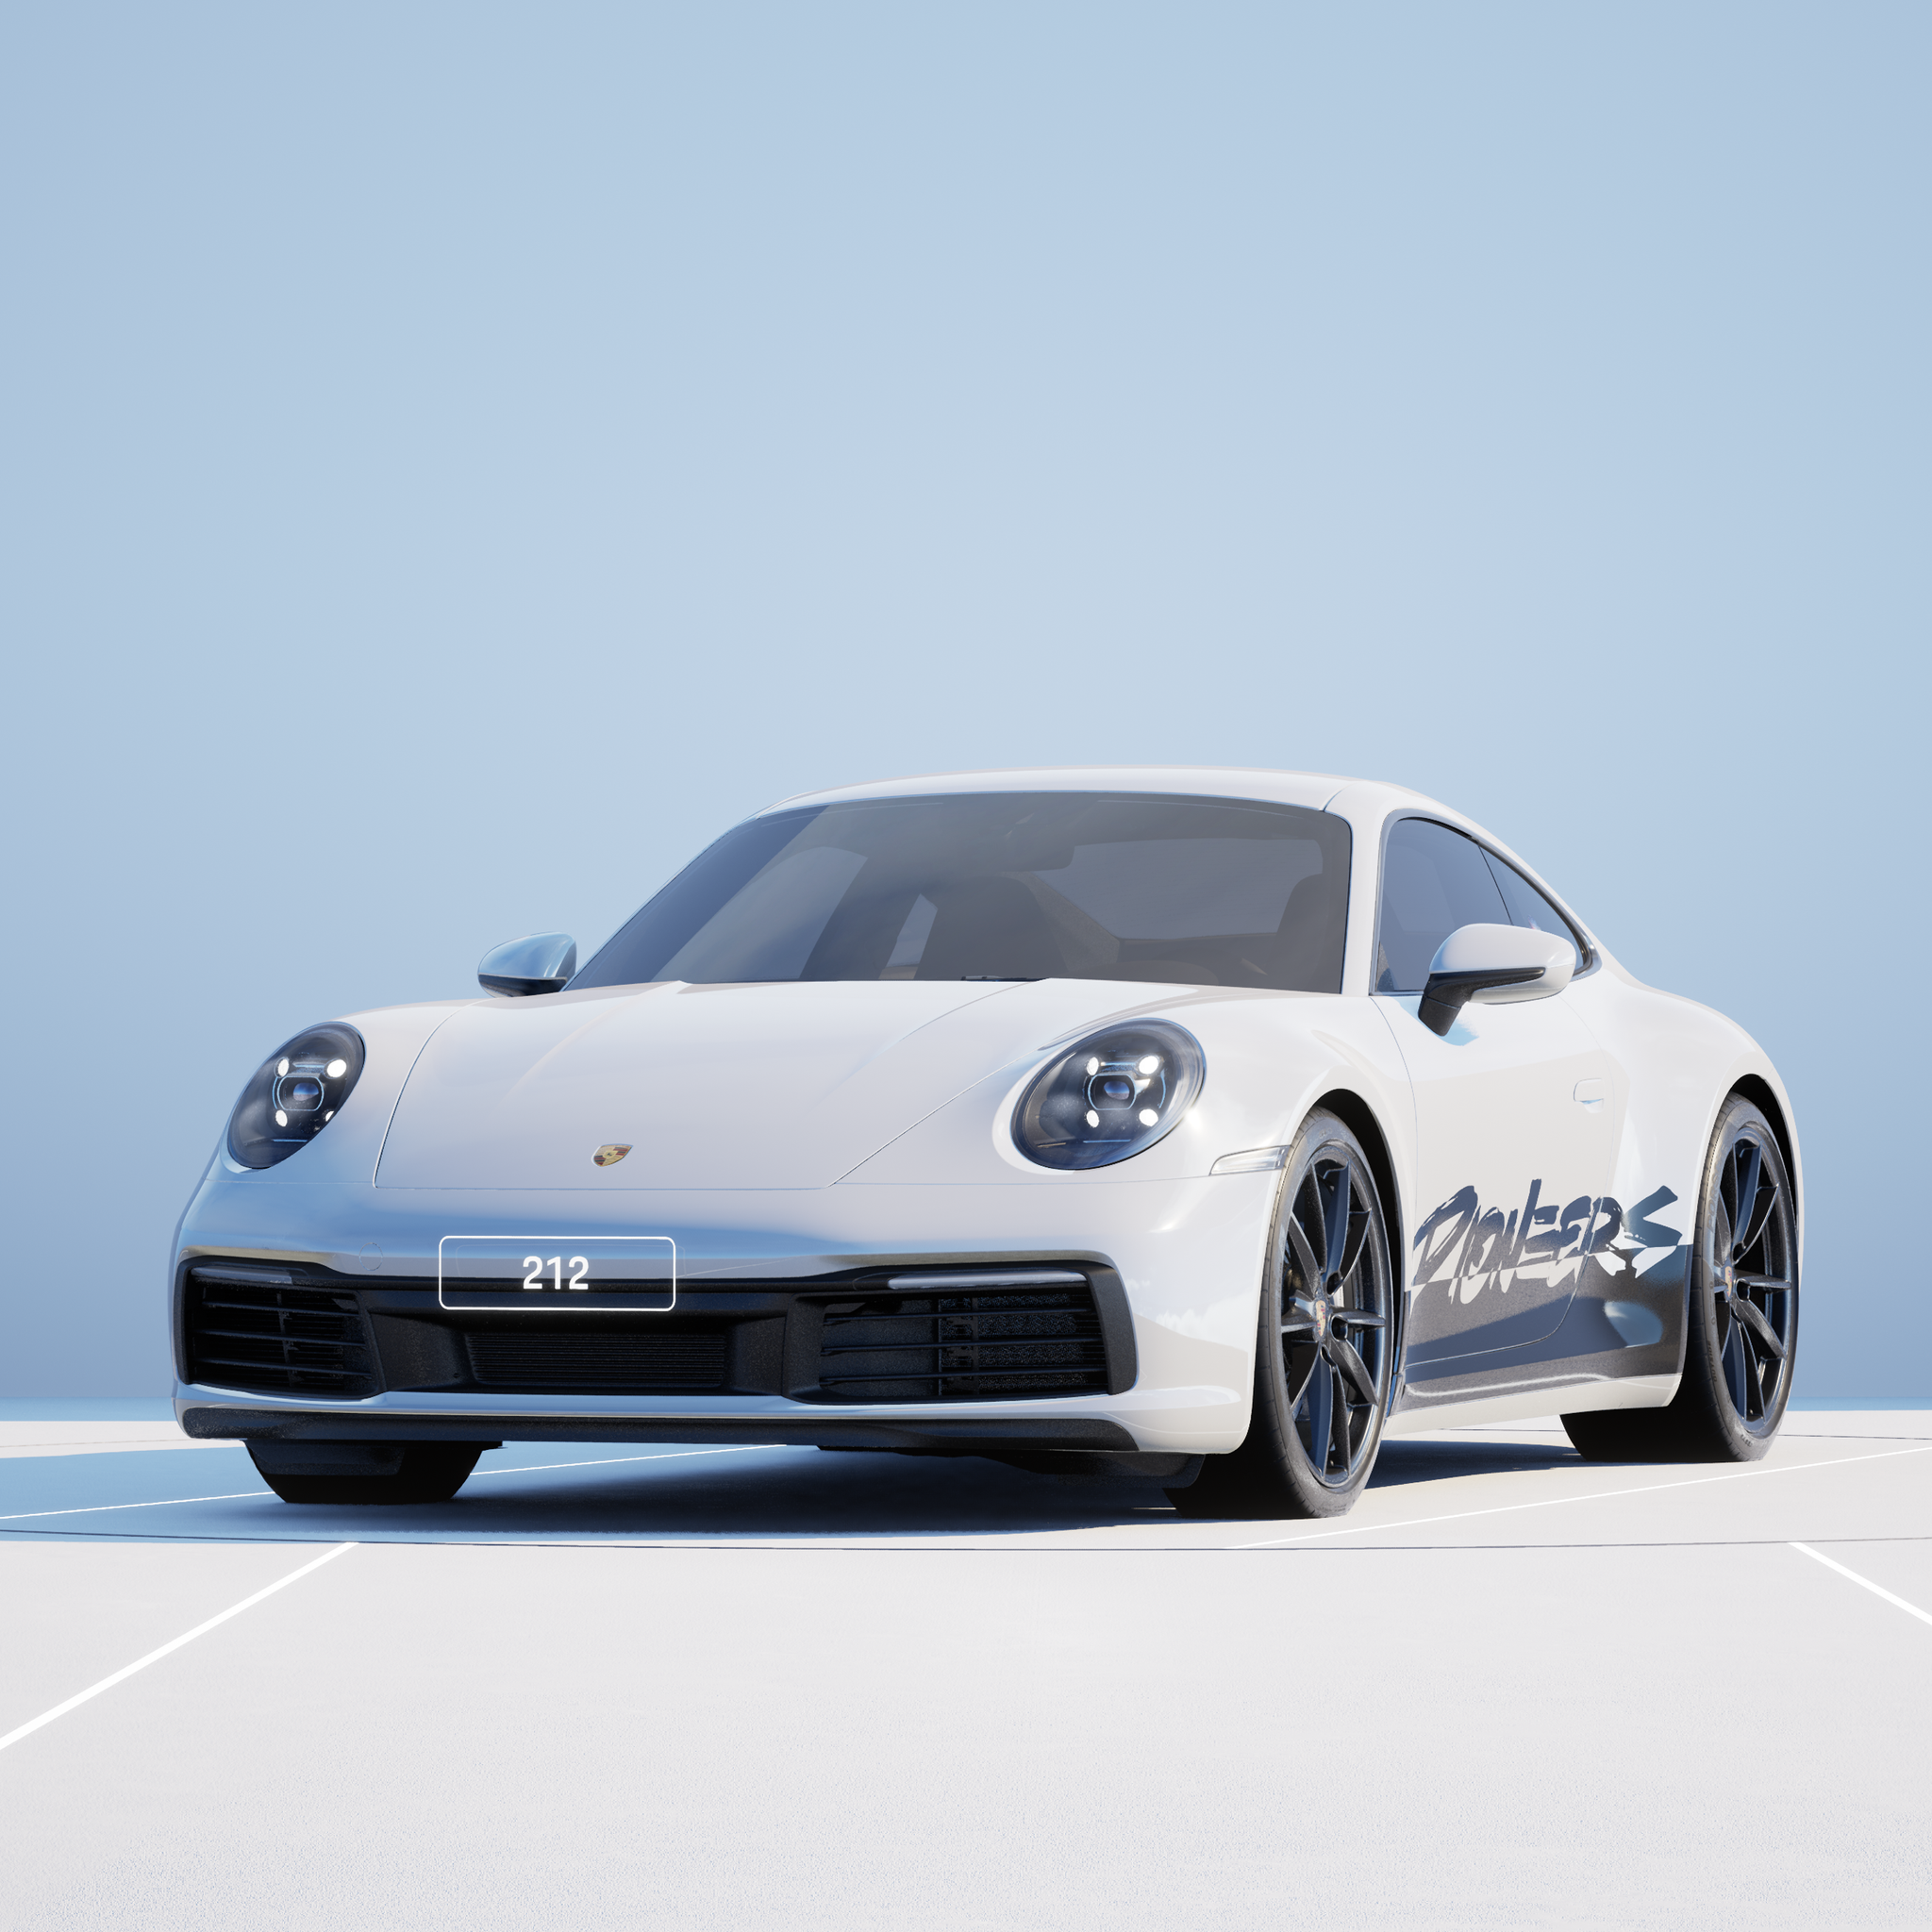 The PORSCHΞ 911 212 image in phase